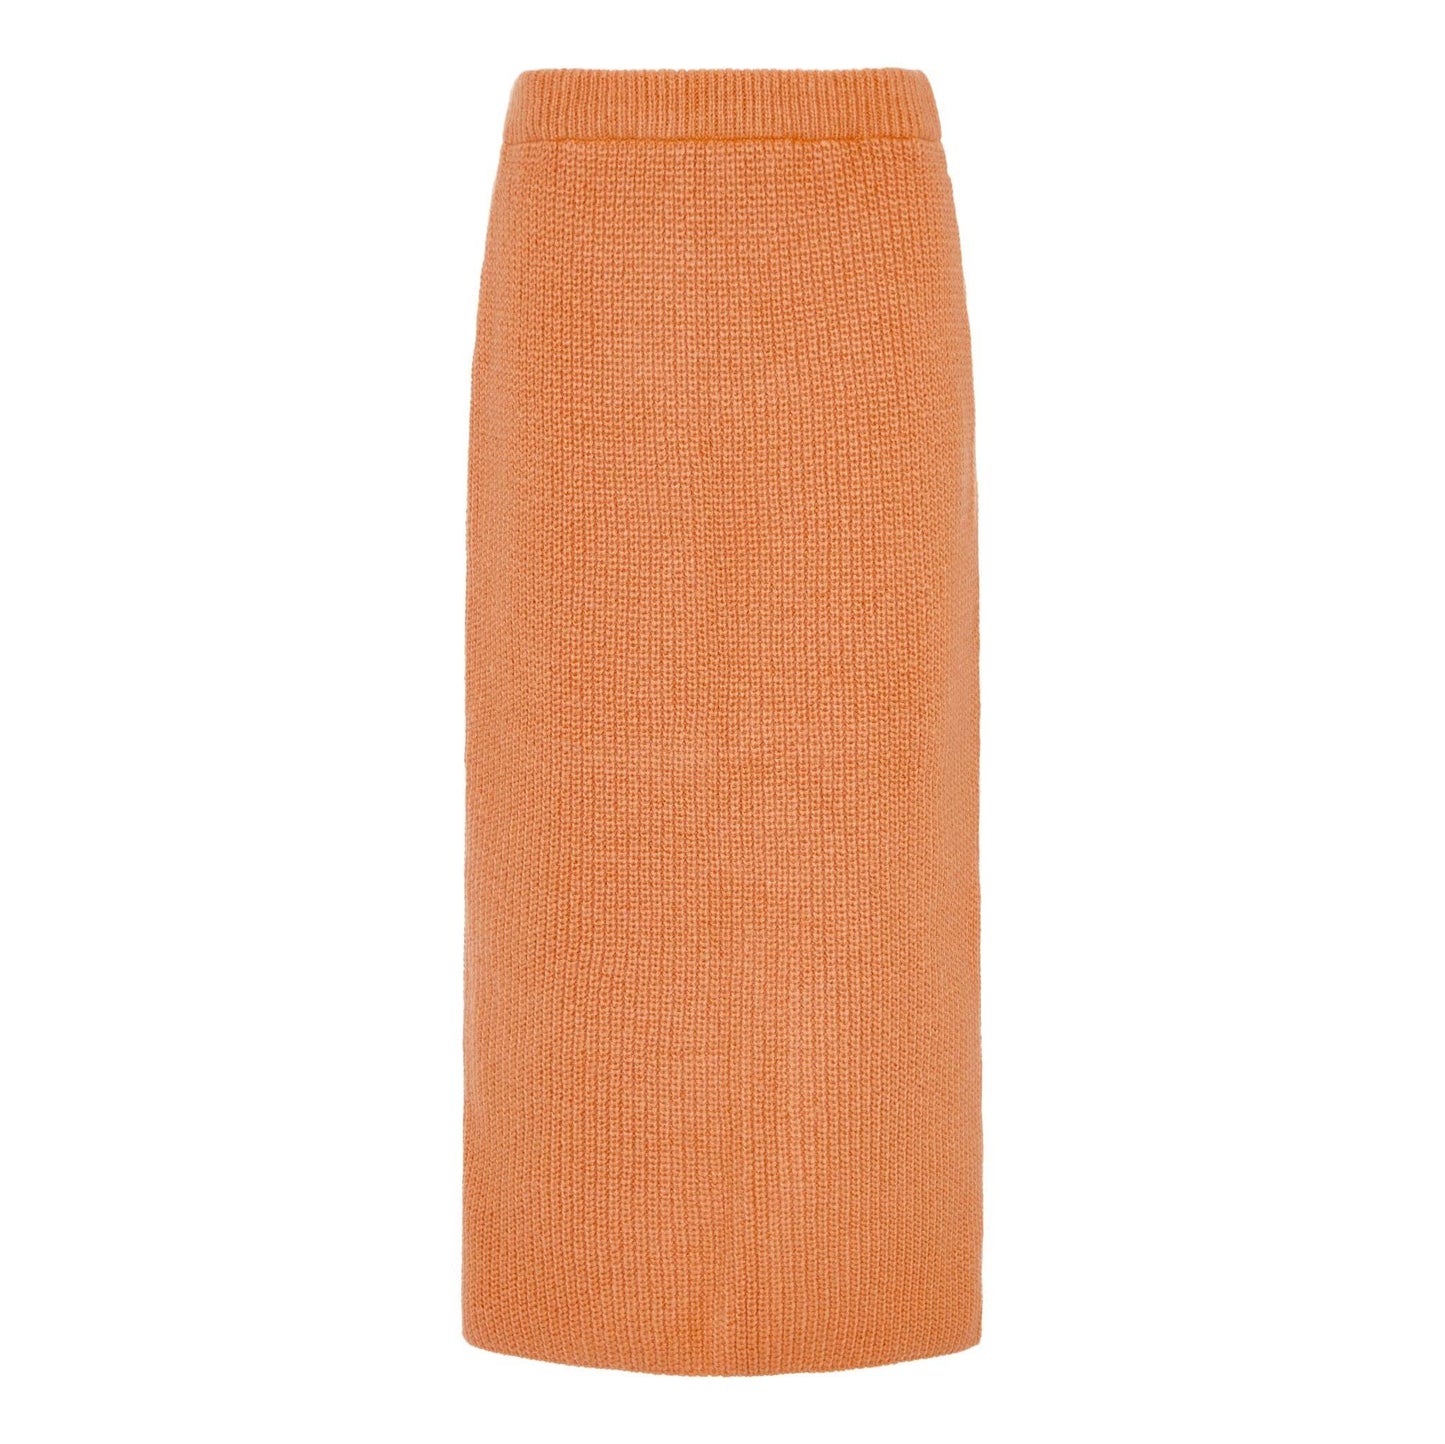 Cable Midi Skirt in Apricot